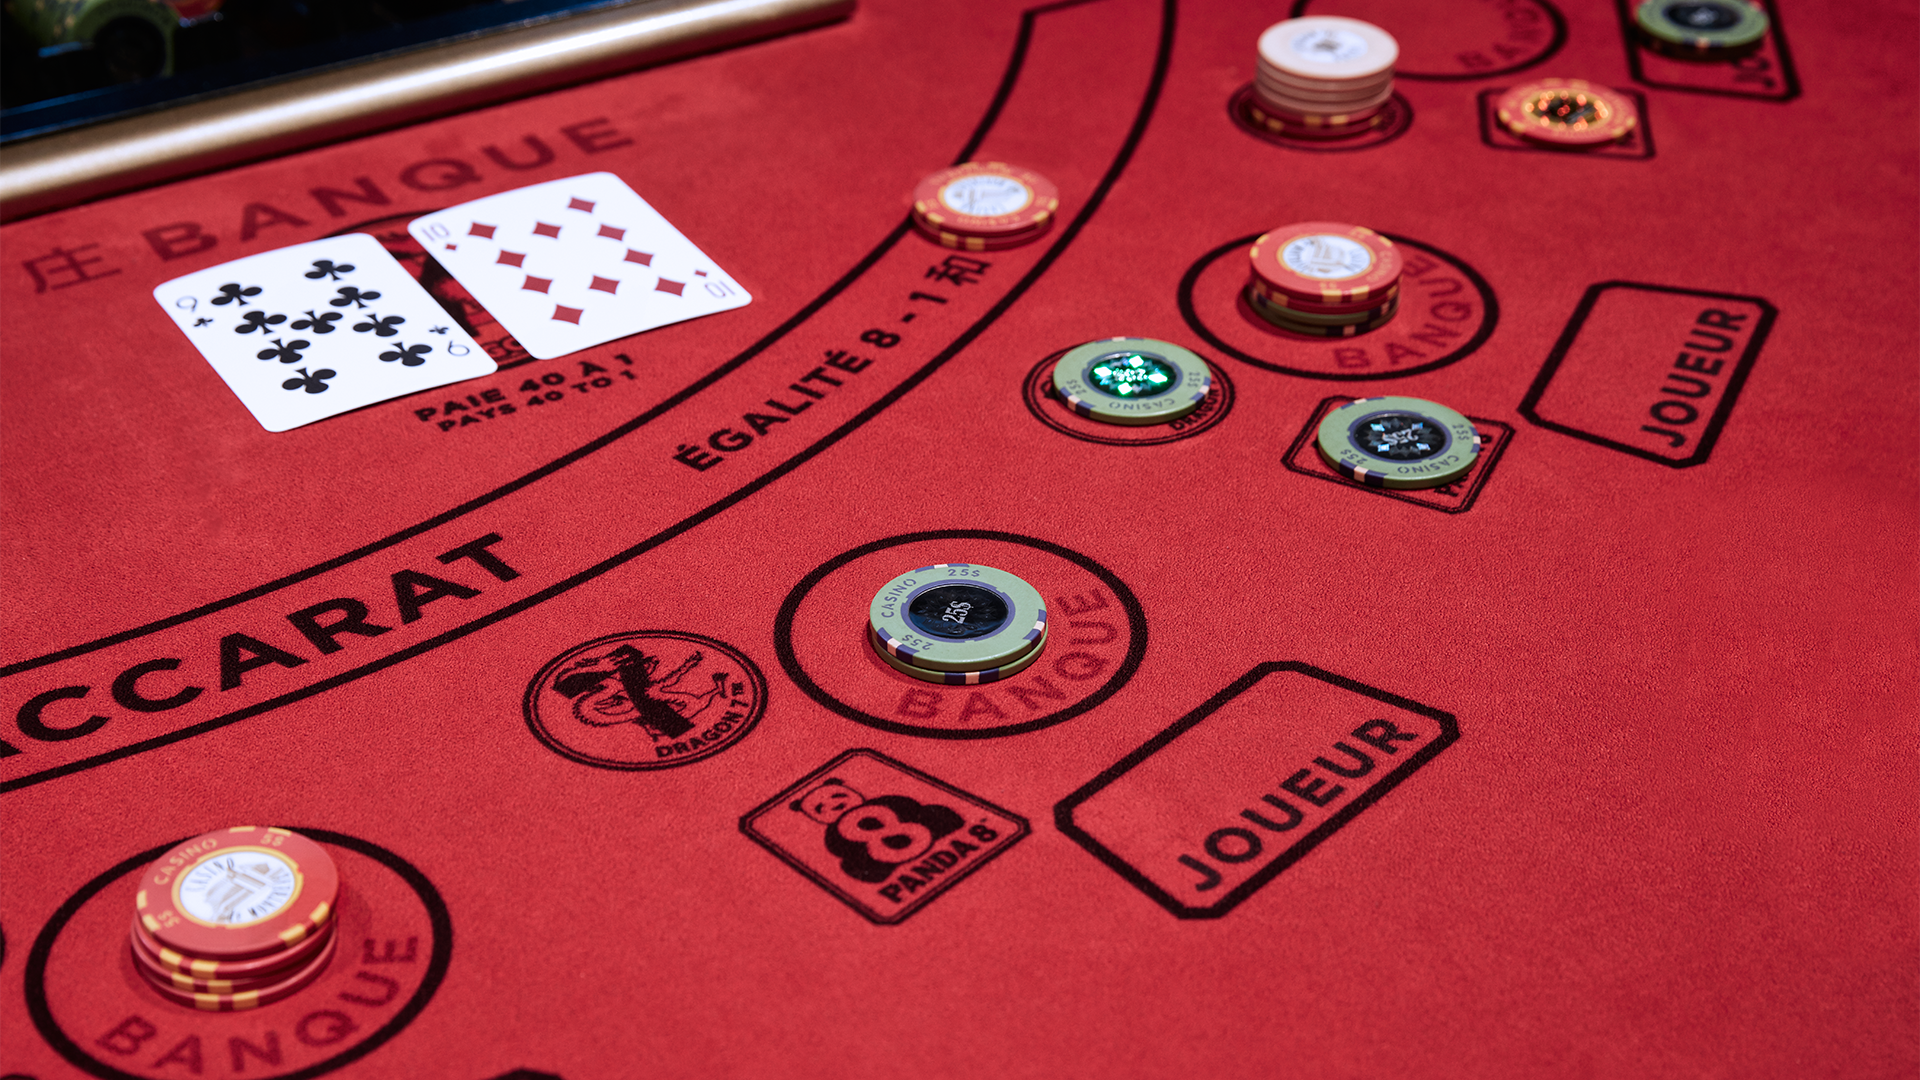 baccarat rouge 540